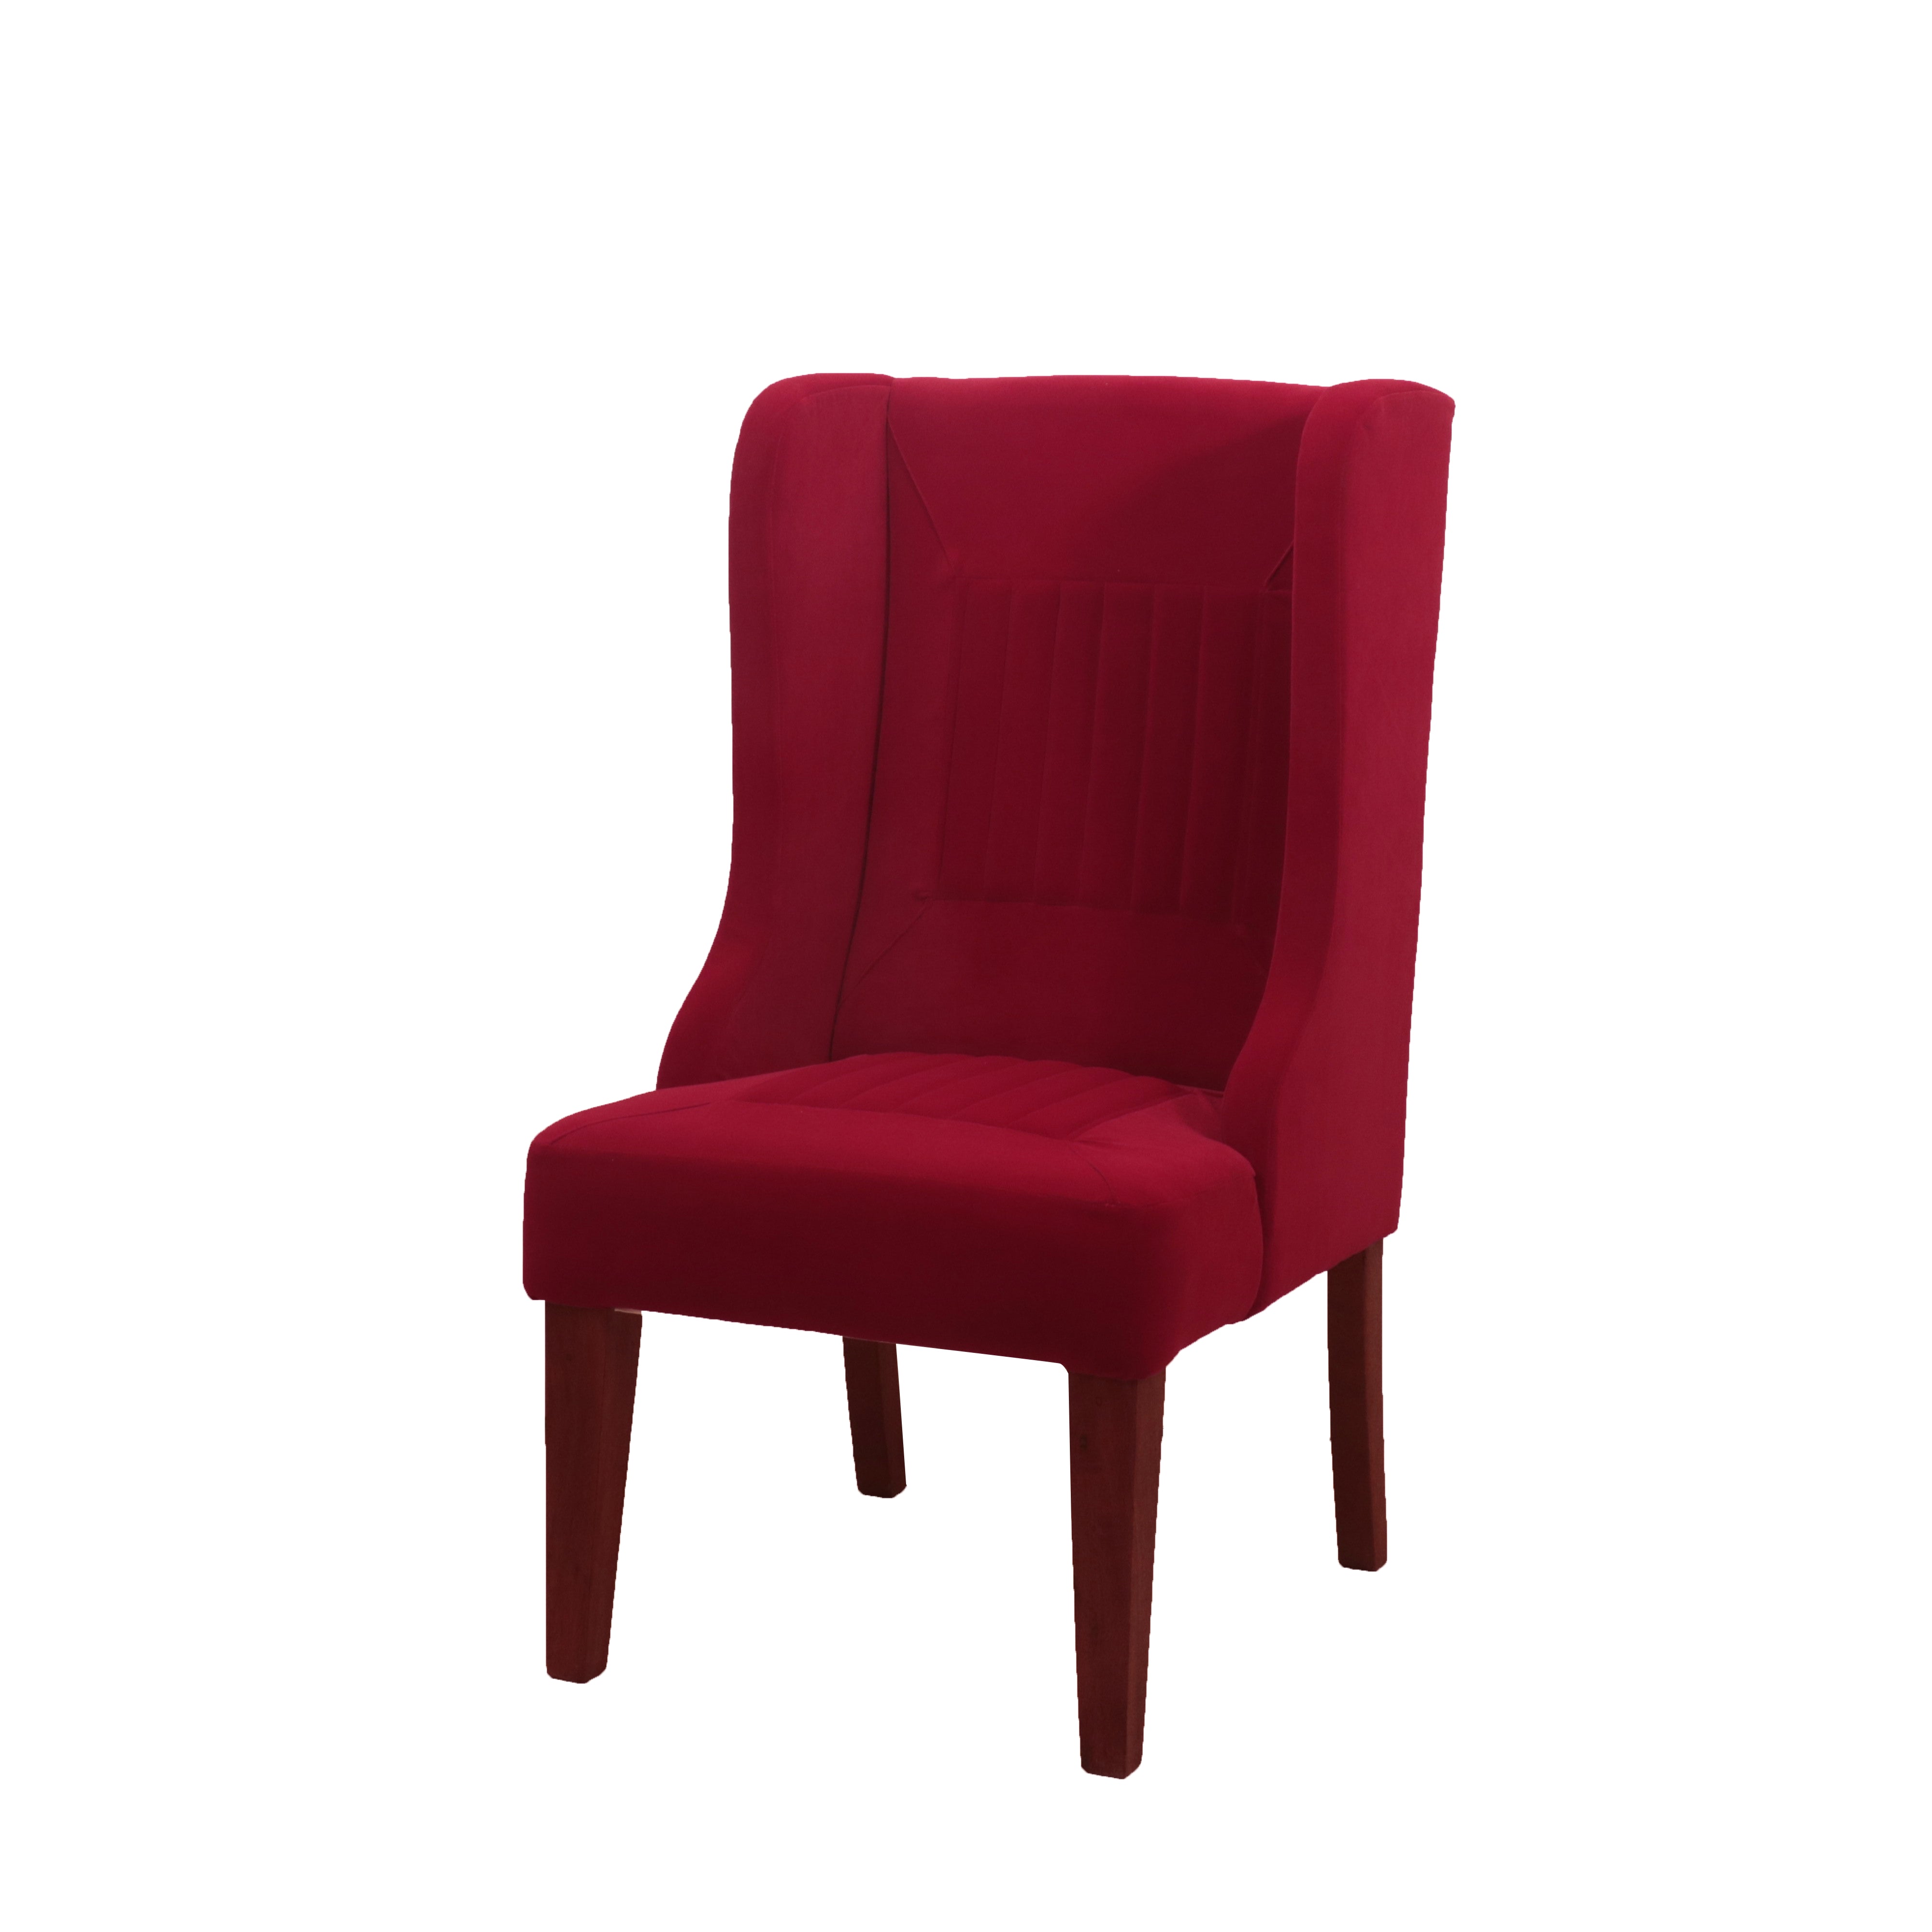 Bright Red Winged Chair Arm Chair